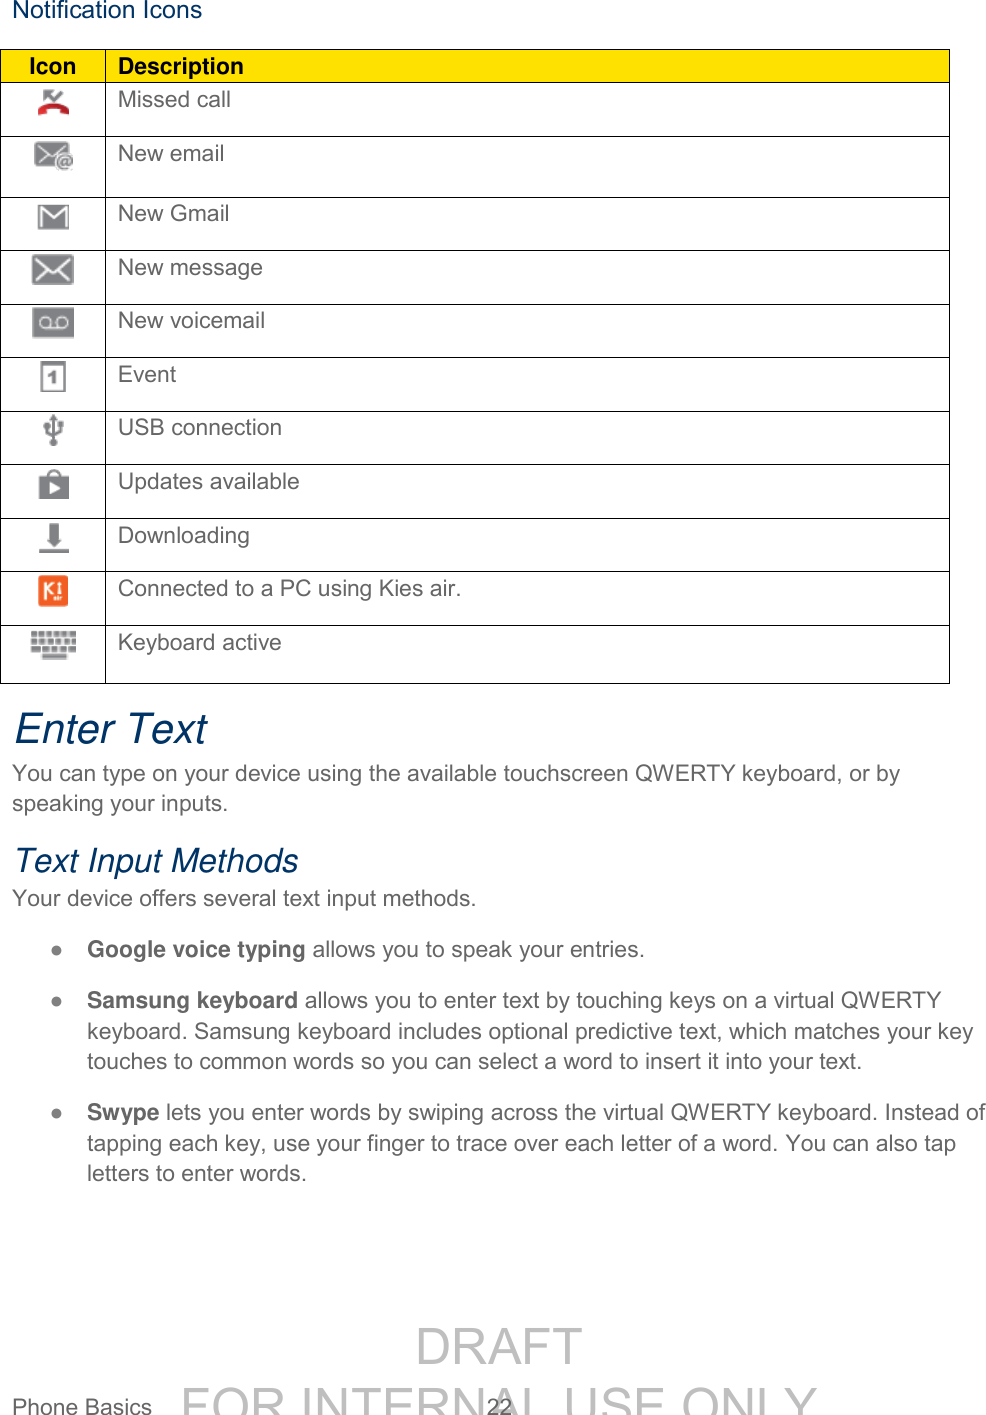 DRAFT FOR INTERNAL USE ONLYPhone Basics  22   Notification Icons Icon Description  Missed call  New email   New Gmail   New message  New voicemail  Event  USB connection  Updates available  Downloading    Connected to a PC using Kies air.  Keyboard active Enter Text You can type on your device using the available touchscreen QWERTY keyboard, or by speaking your inputs. Text Input Methods Your device offers several text input methods. ● Google voice typing allows you to speak your entries. ● Samsung keyboard allows you to enter text by touching keys on a virtual QWERTY keyboard. Samsung keyboard includes optional predictive text, which matches your key touches to common words so you can select a word to insert it into your text. ● Swype lets you enter words by swiping across the virtual QWERTY keyboard. Instead of tapping each key, use your finger to trace over each letter of a word. You can also tap letters to enter words. 